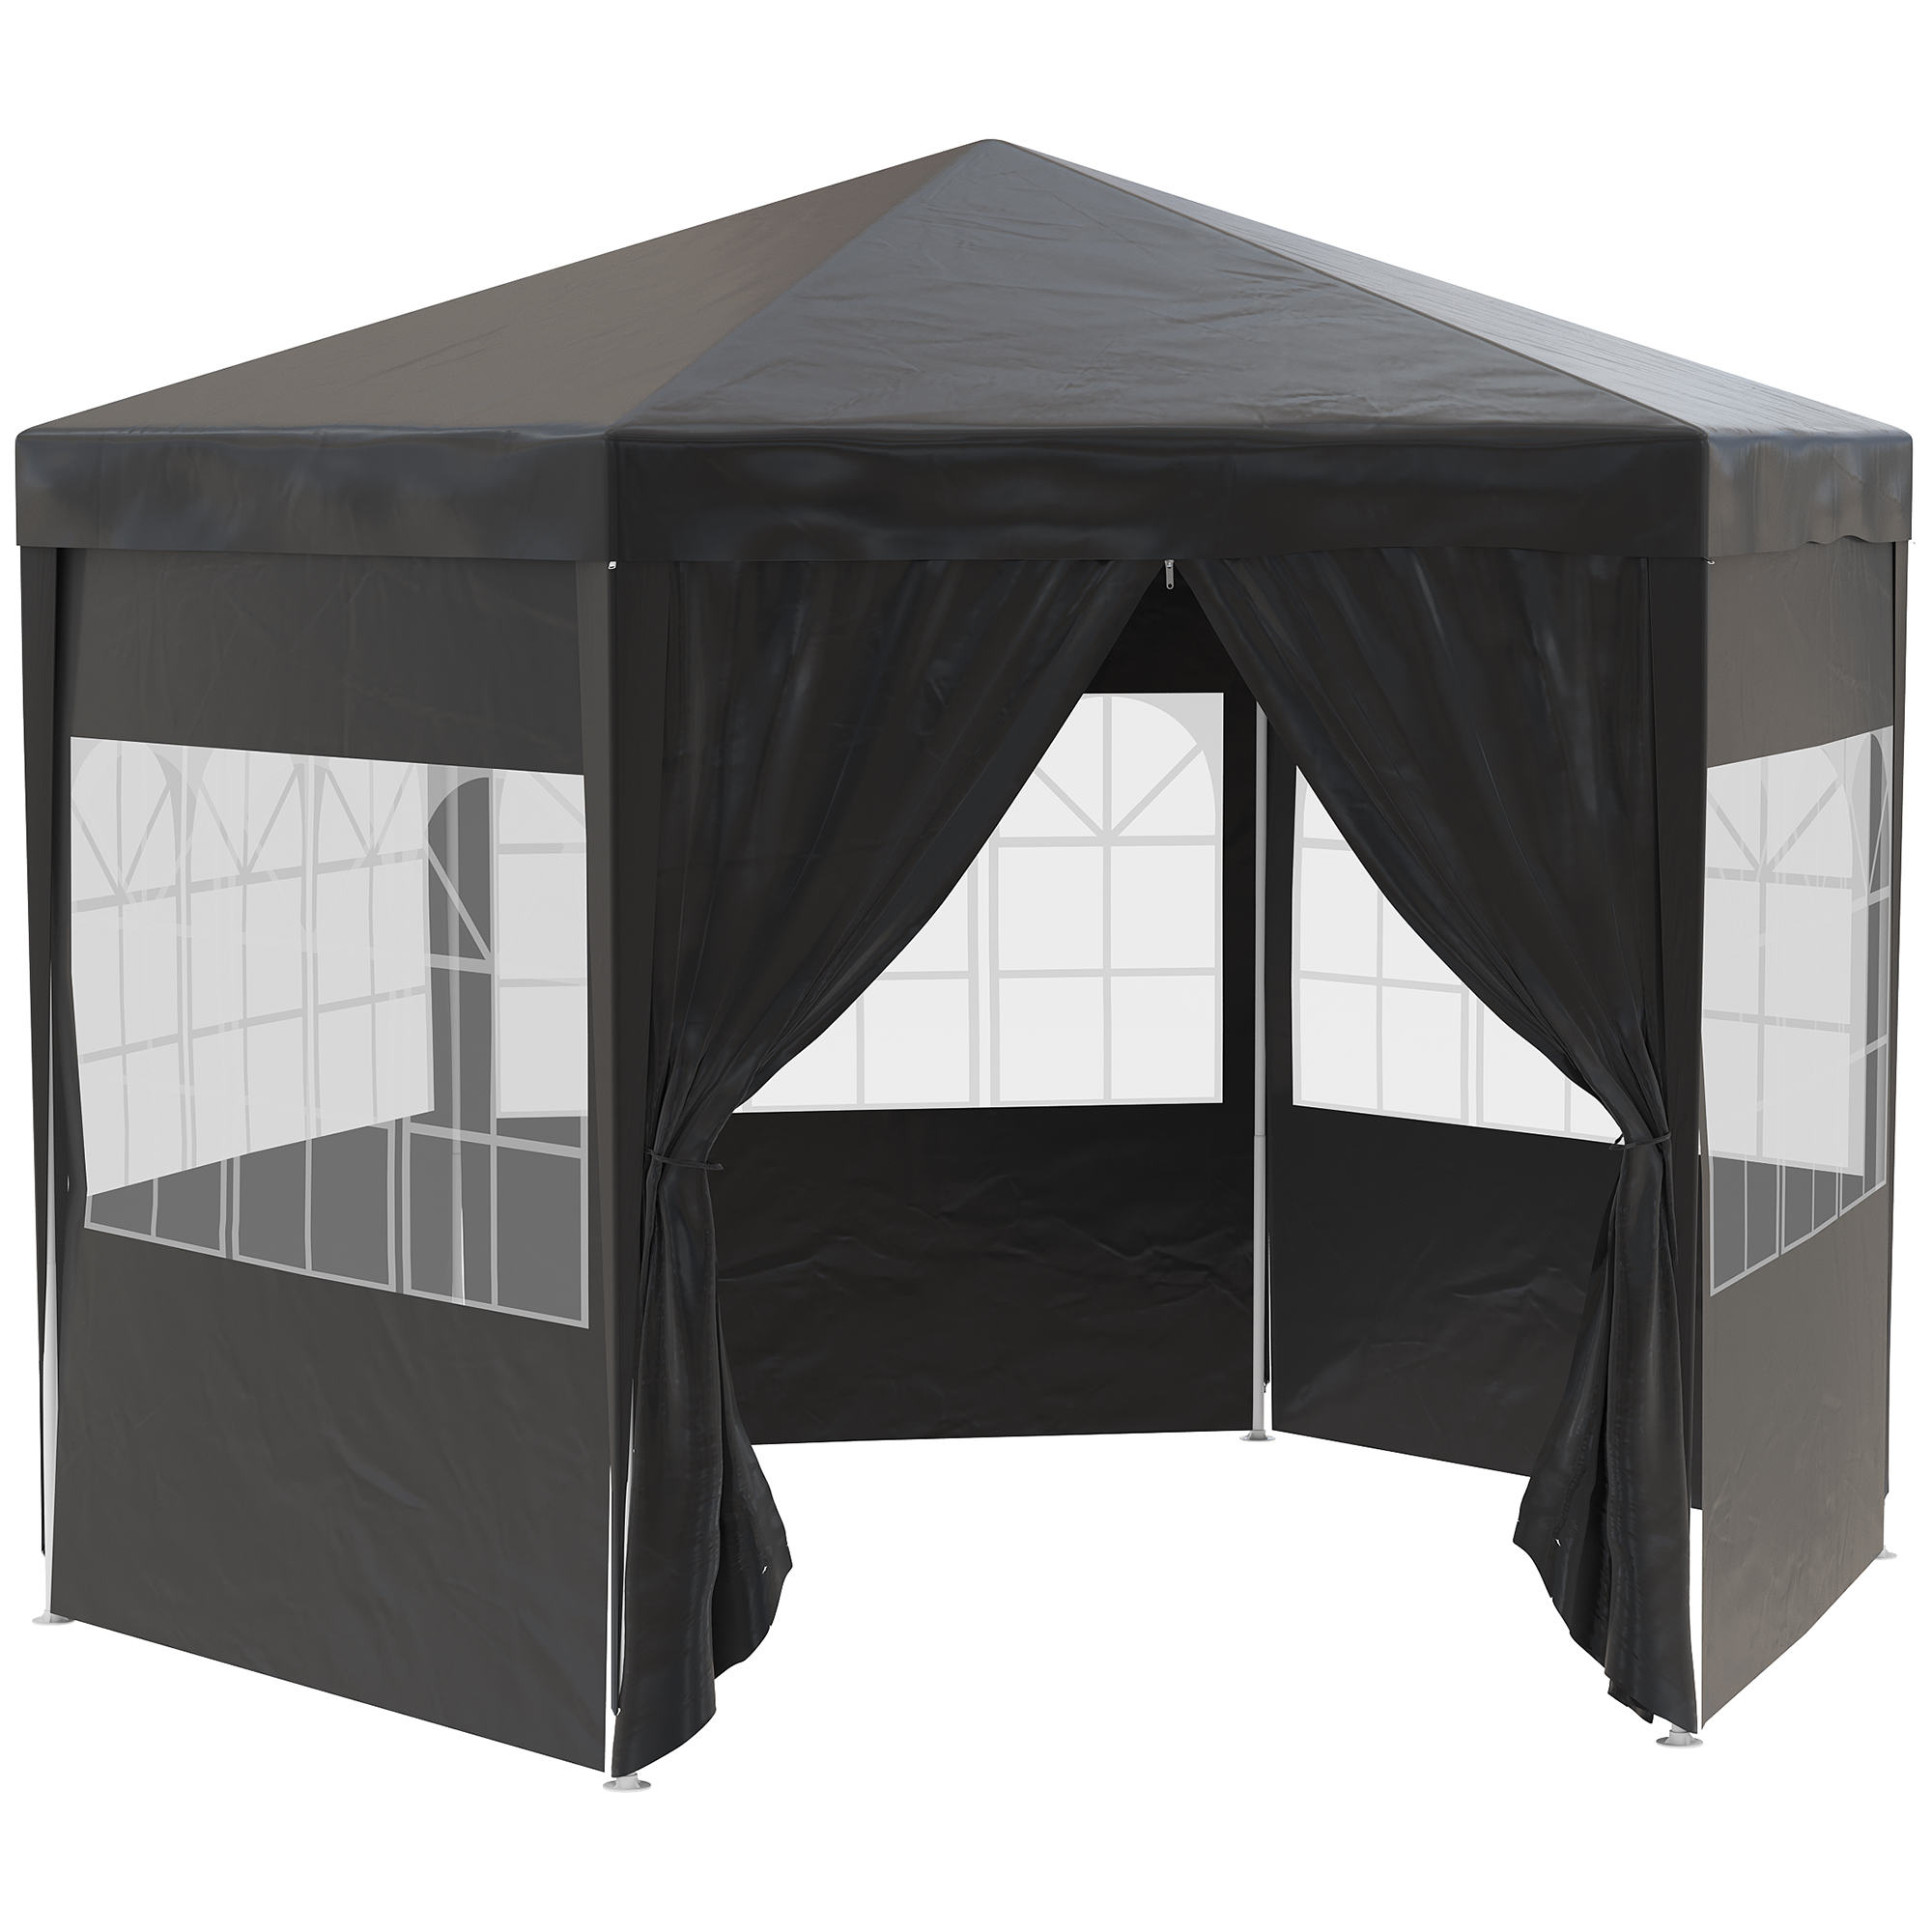 Outsunny 4m Canopy Rentals, Hexagonal Gazebo Canopy Party Tent With 6 Removable Side Walls For Outdoor Event With Windows And Doors, Black